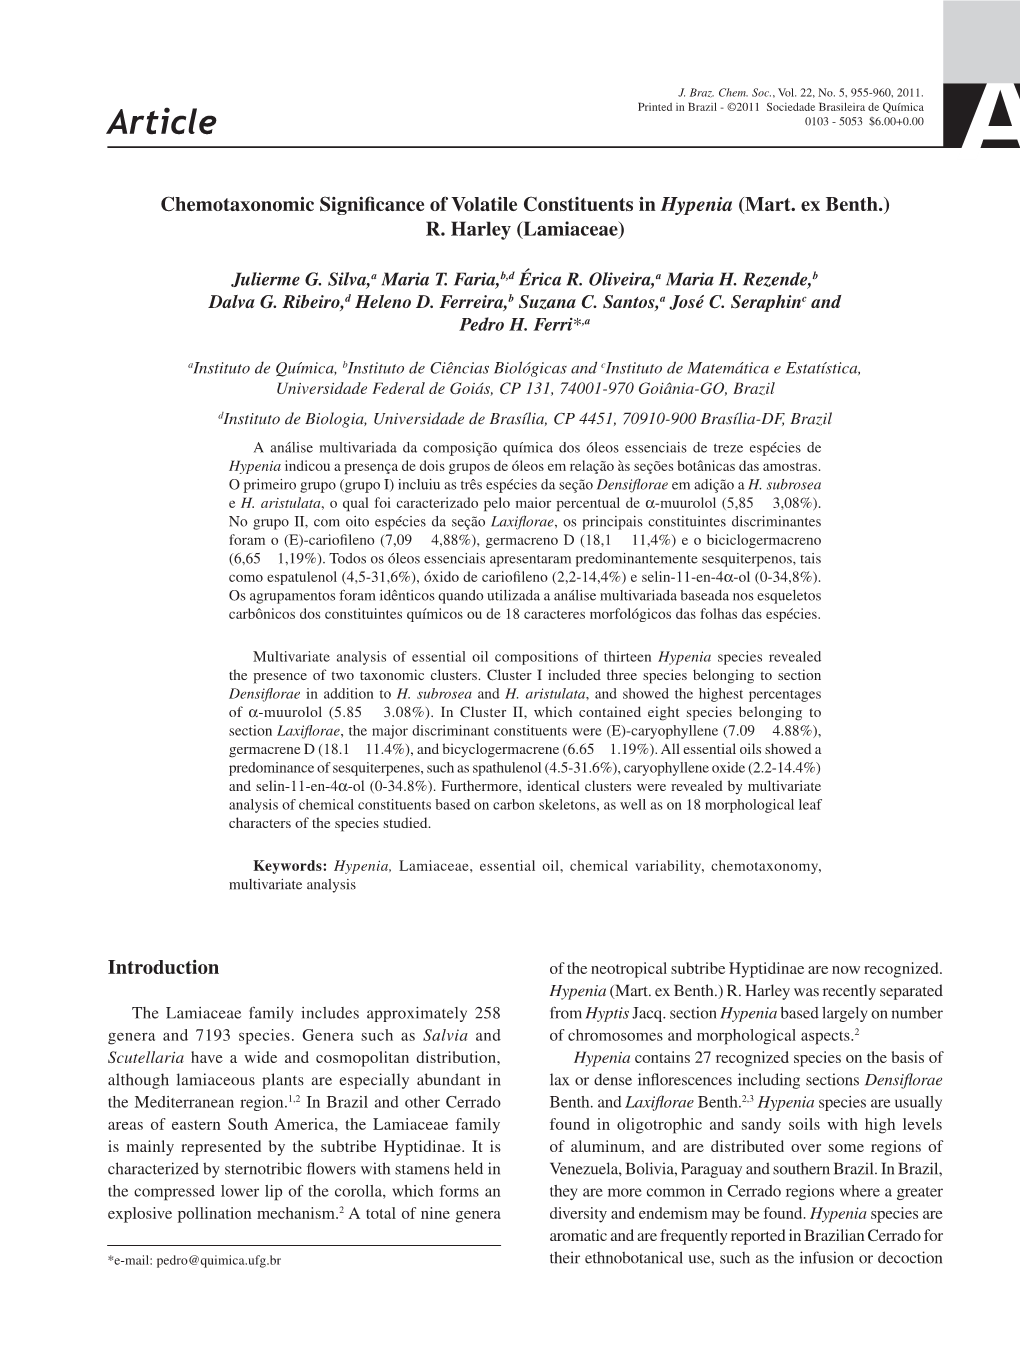 Article 0103 - 5053 $6.00+0.00 a Chemotaxonomic Significance of Volatile Constituents Inhypenia (Mart